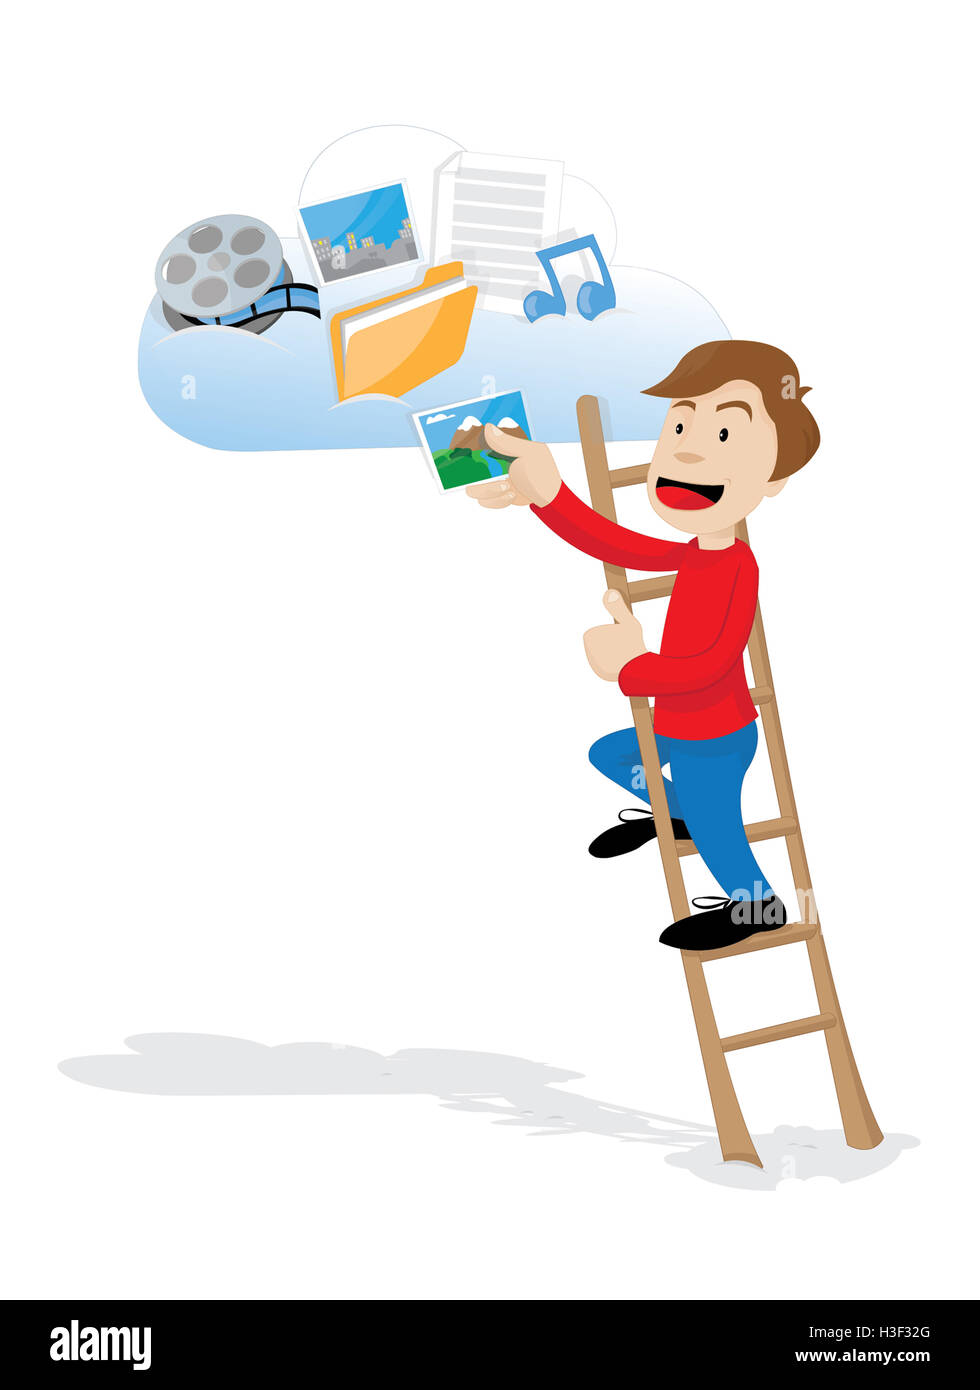 a vector cartoon representing a funny man uploading some photos on a cloud hosting storage Stock Photo